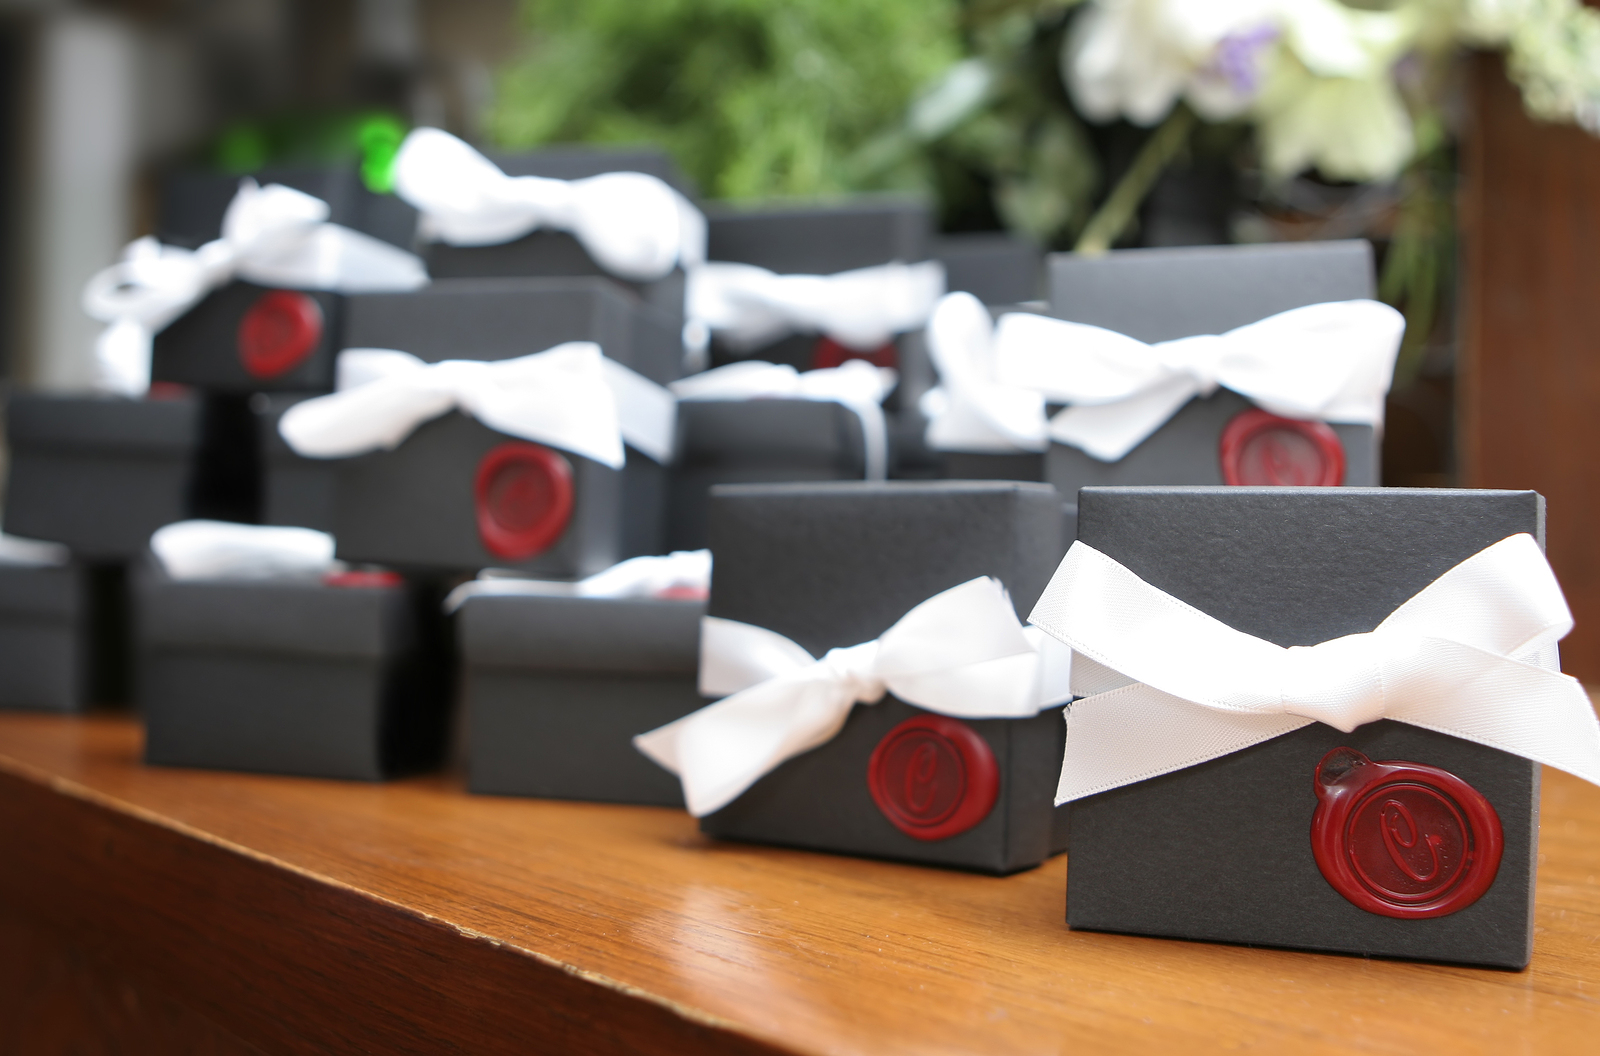 9 Winter Wedding Favors That Will Keep Your Guests Warm Festive